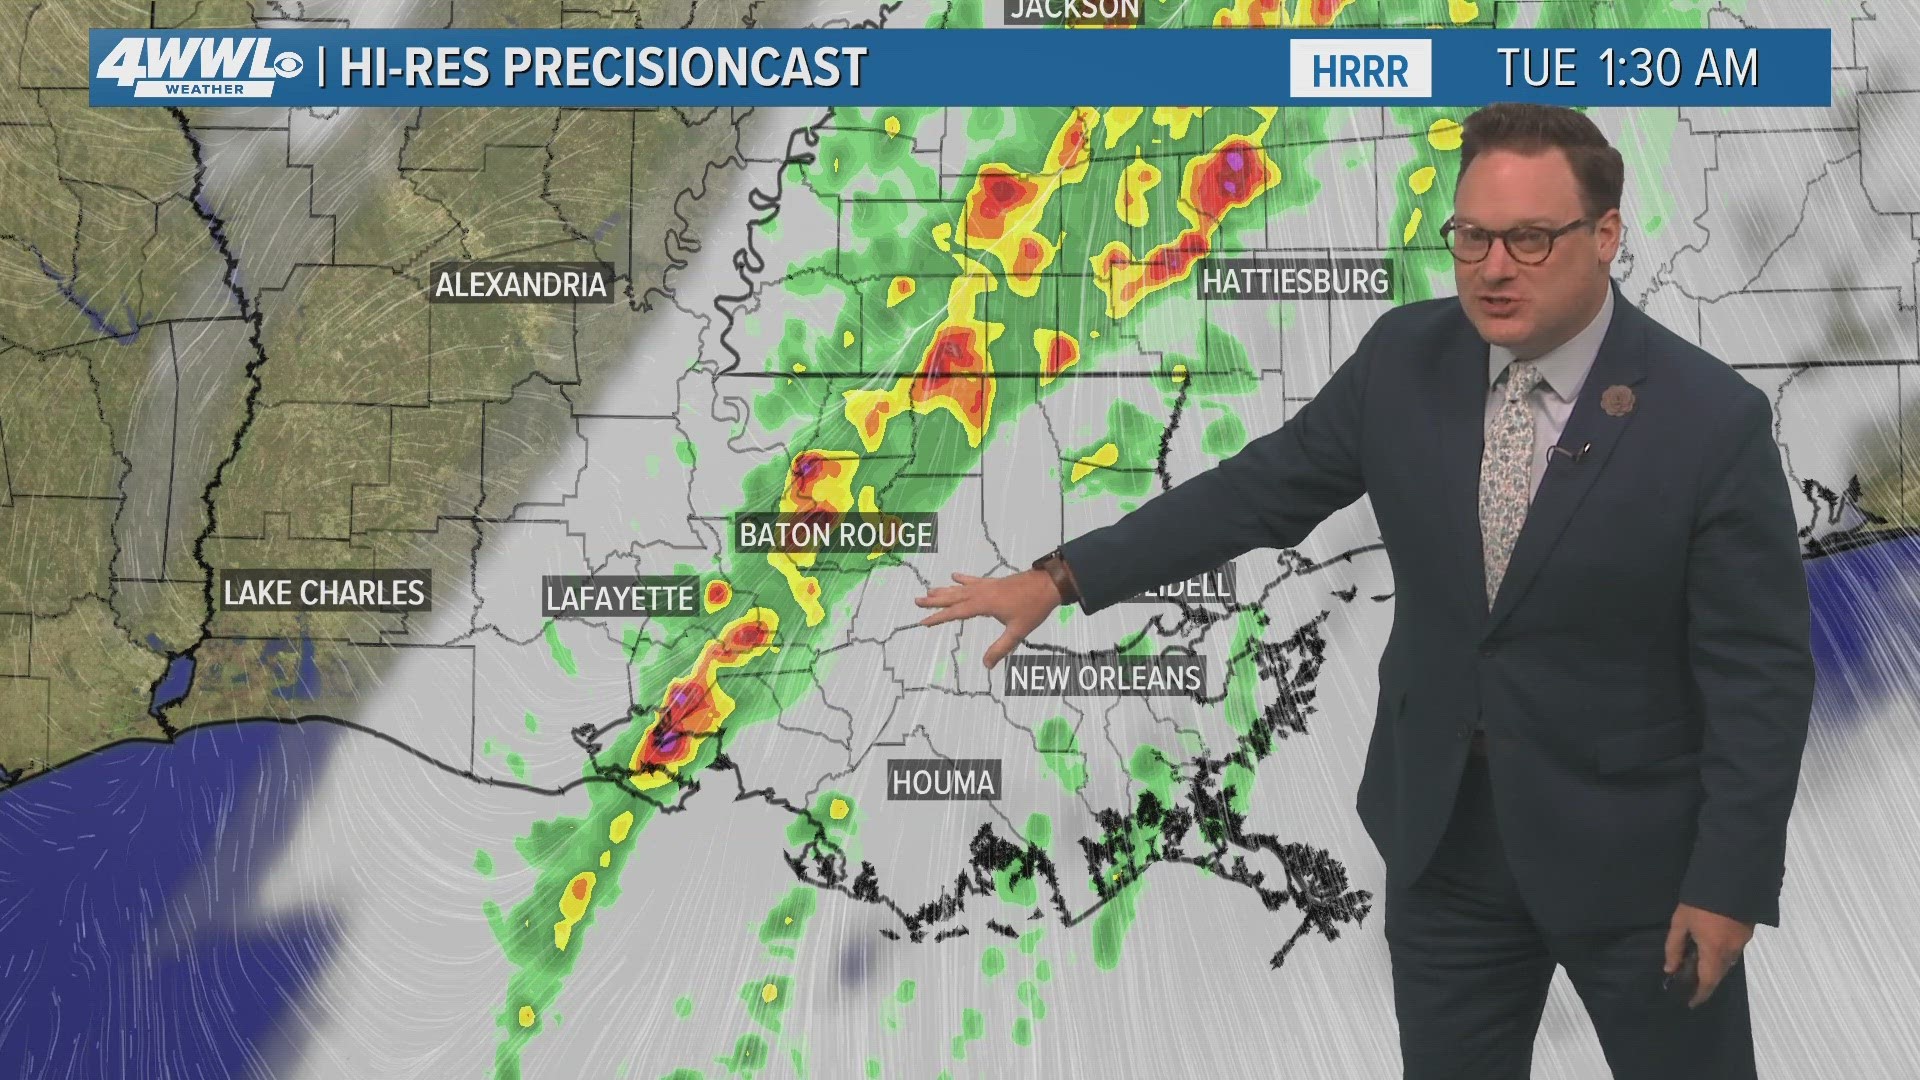 Chief Meteorologist Chris Franklin says storms moving through overnight have the chance to become strong to severe.